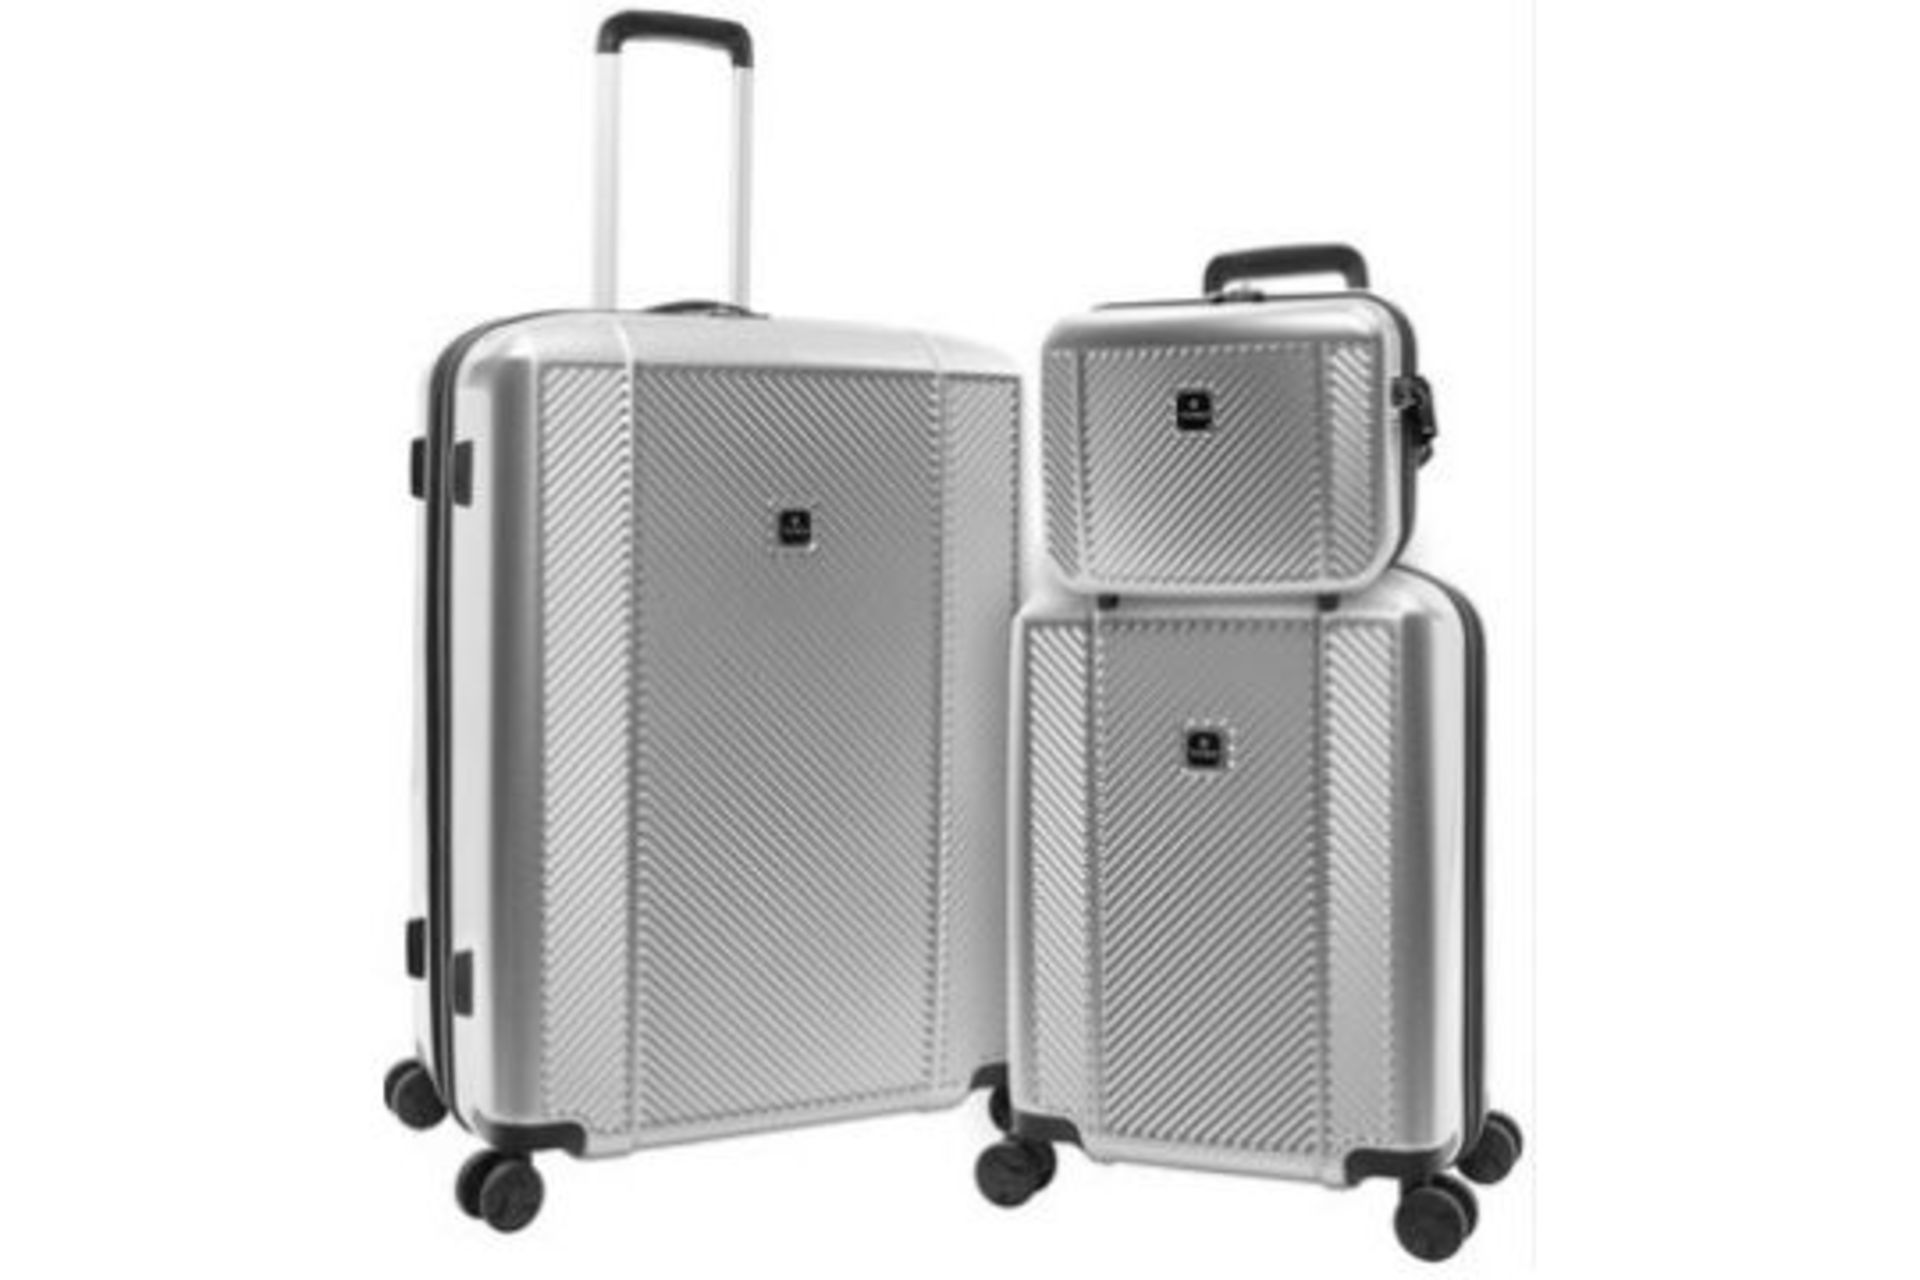 New Boxed 3 Piece Sets of TAG Spectrum Hardside Luggage Set. (SILVER). RRP £199.99 per set. Get - Image 2 of 3